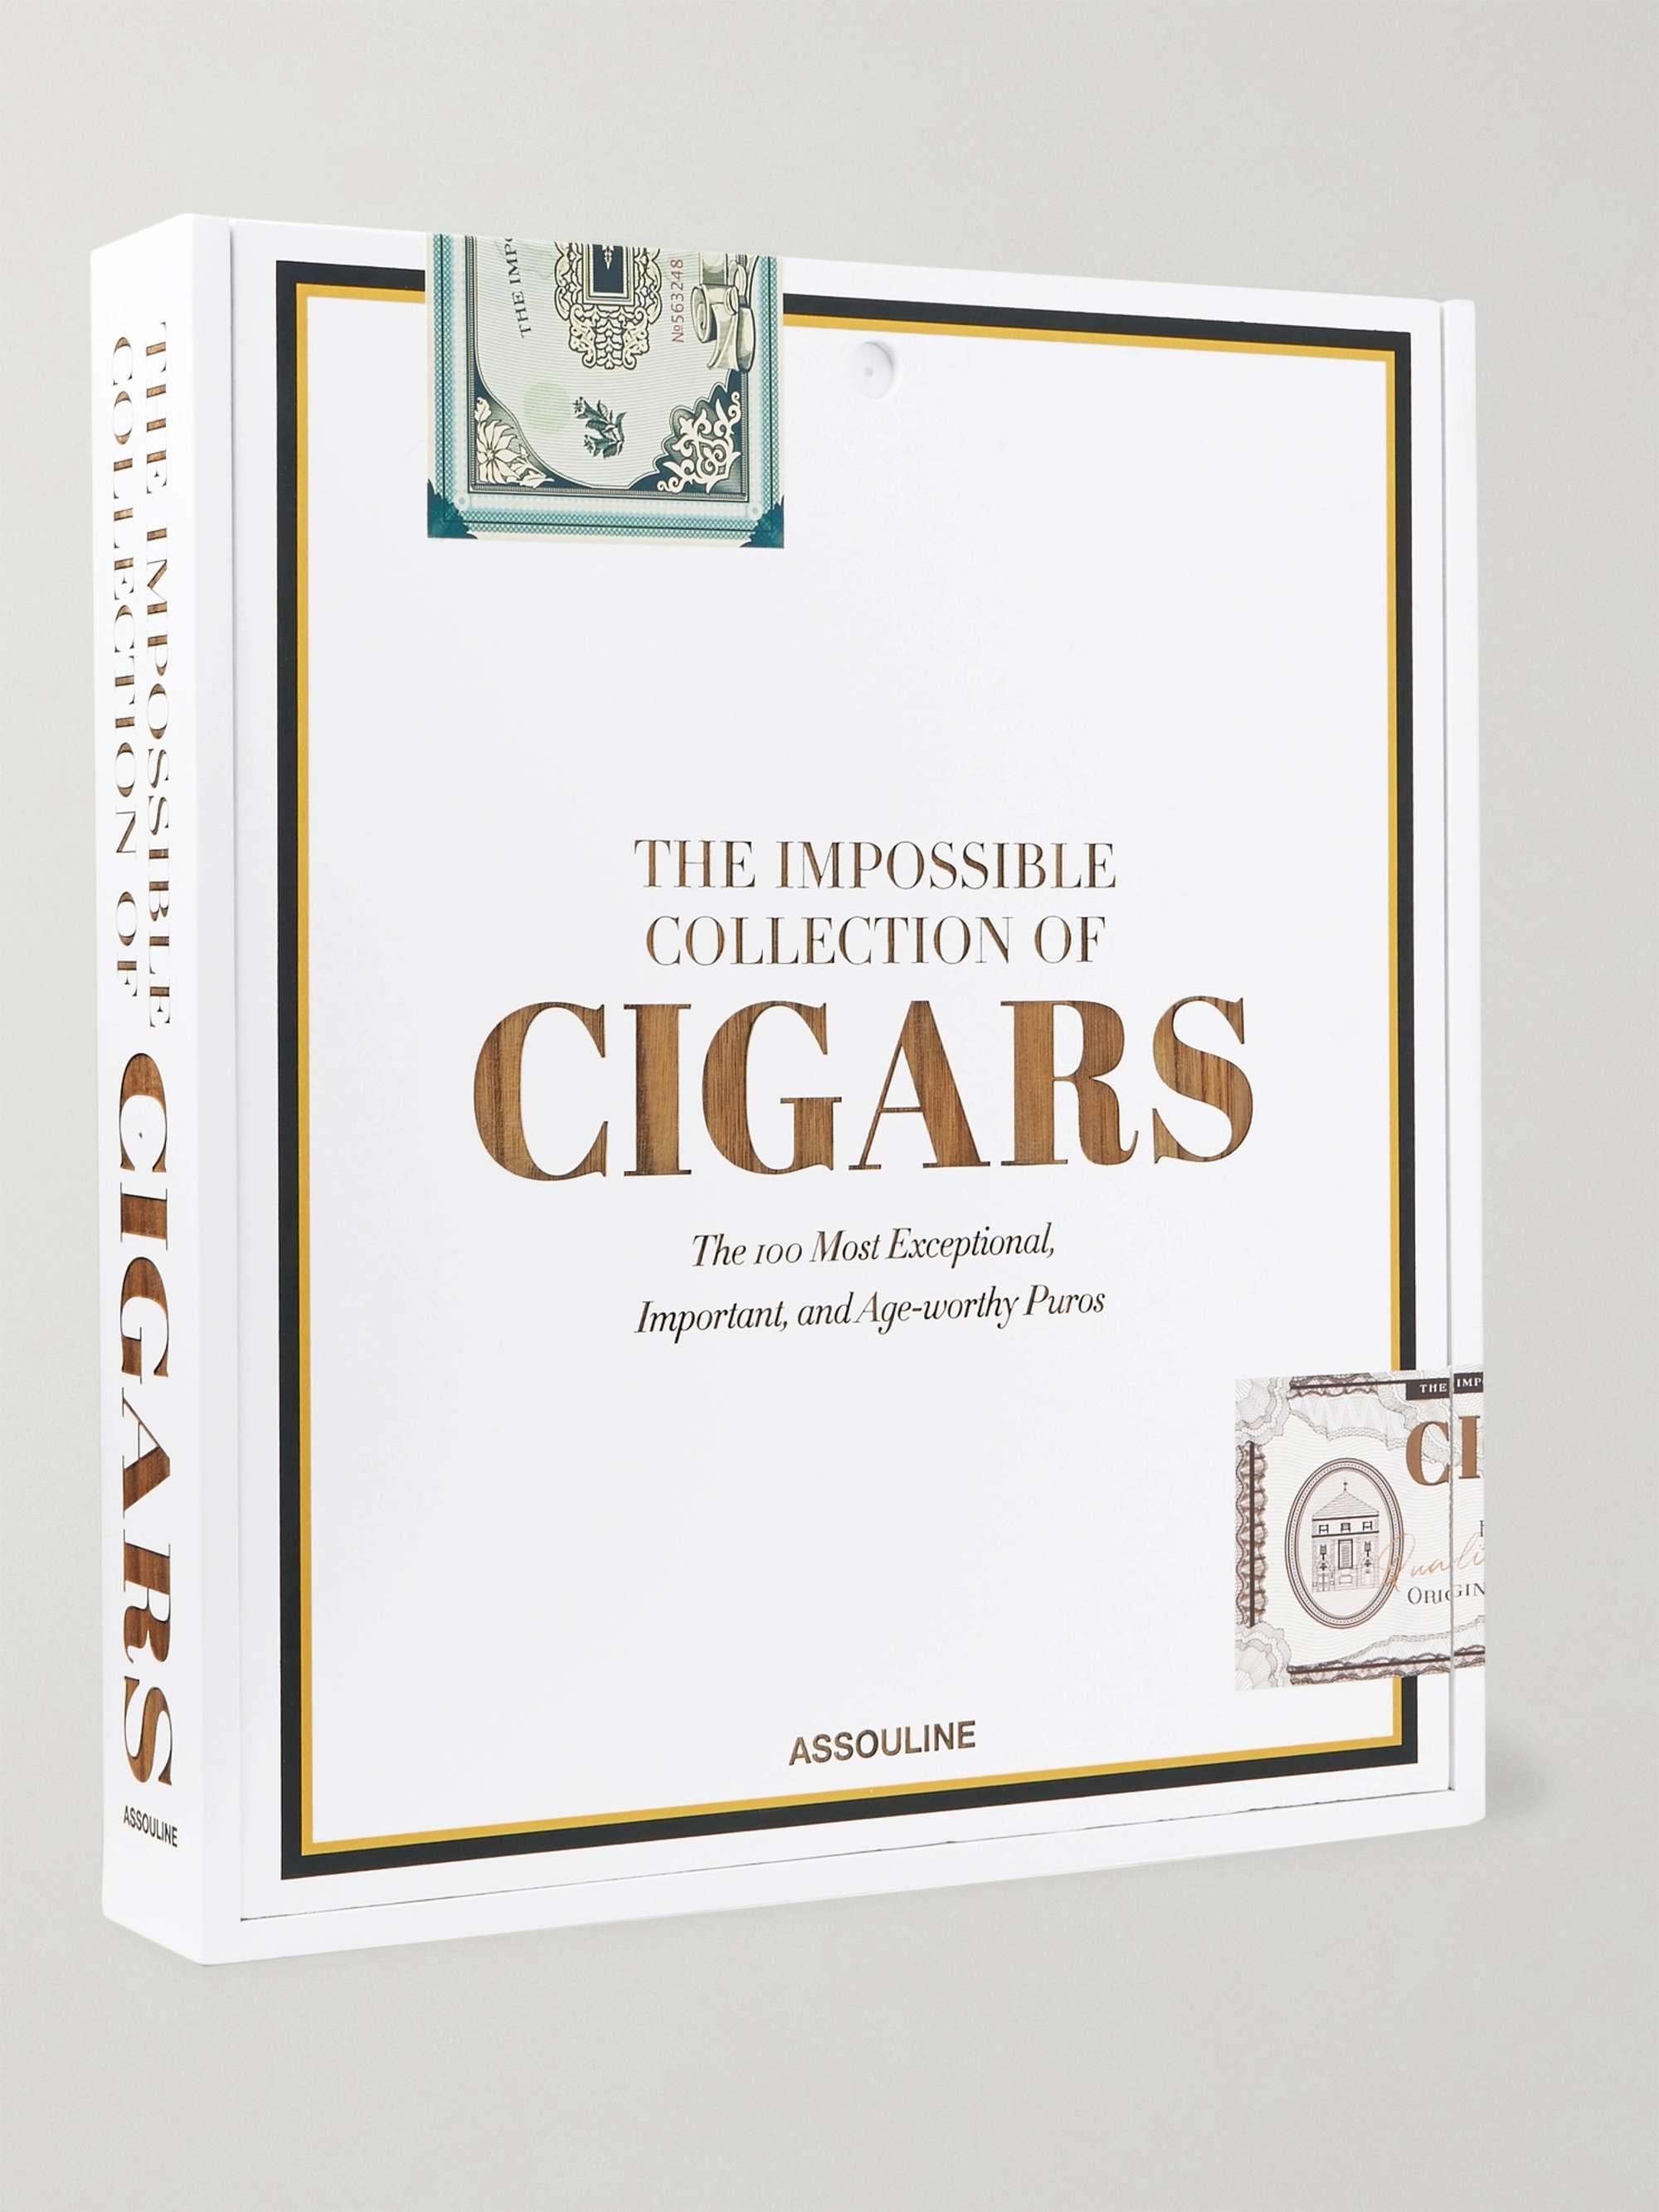 ASSOULINE The Impossible Collection of Cigars Hardcover Book Box Set